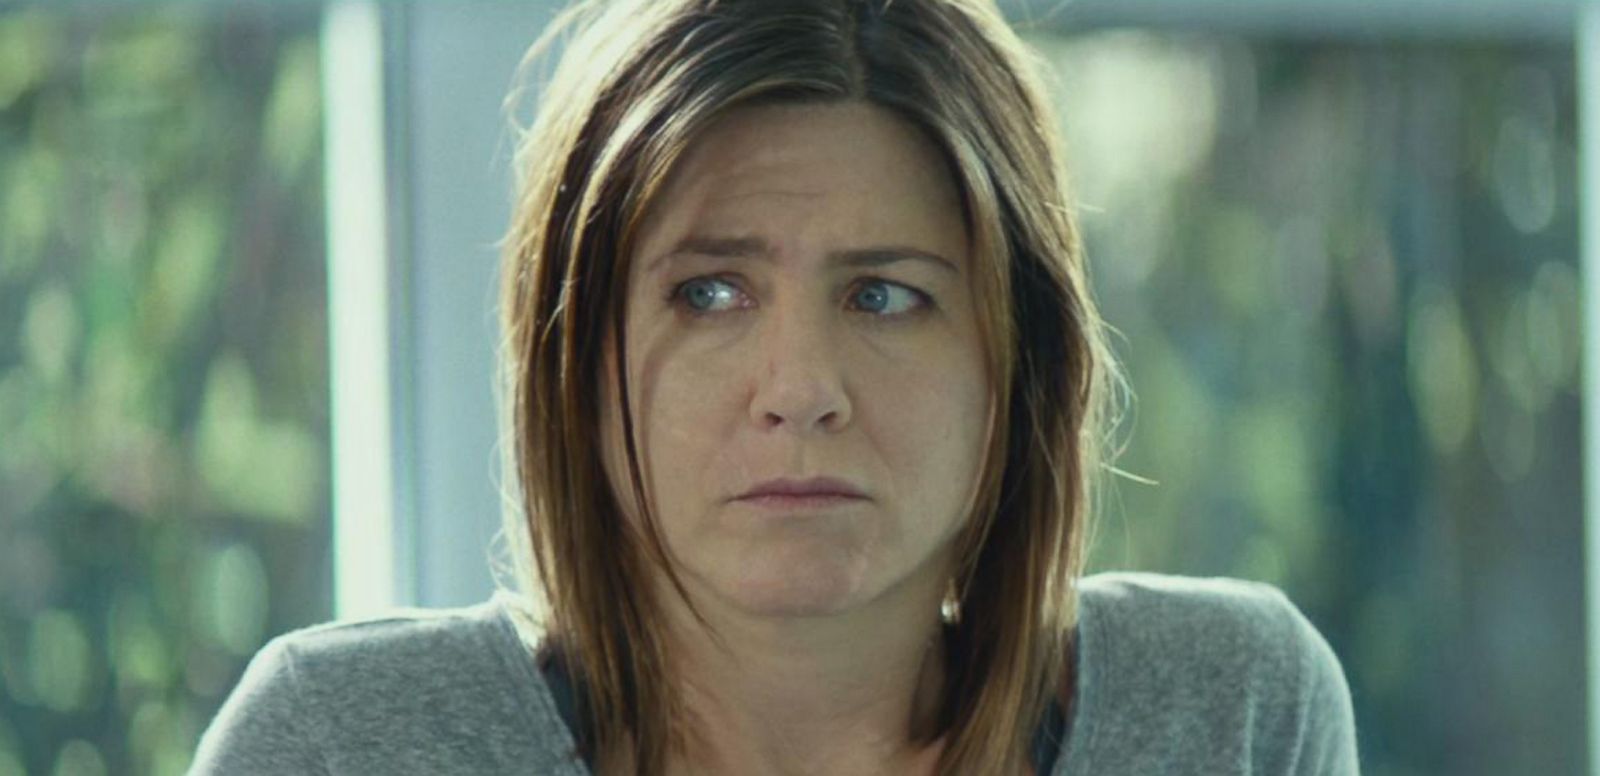 Exclusive First Look at Jennifer Aniston's New Movie 'Cake' - ABC News